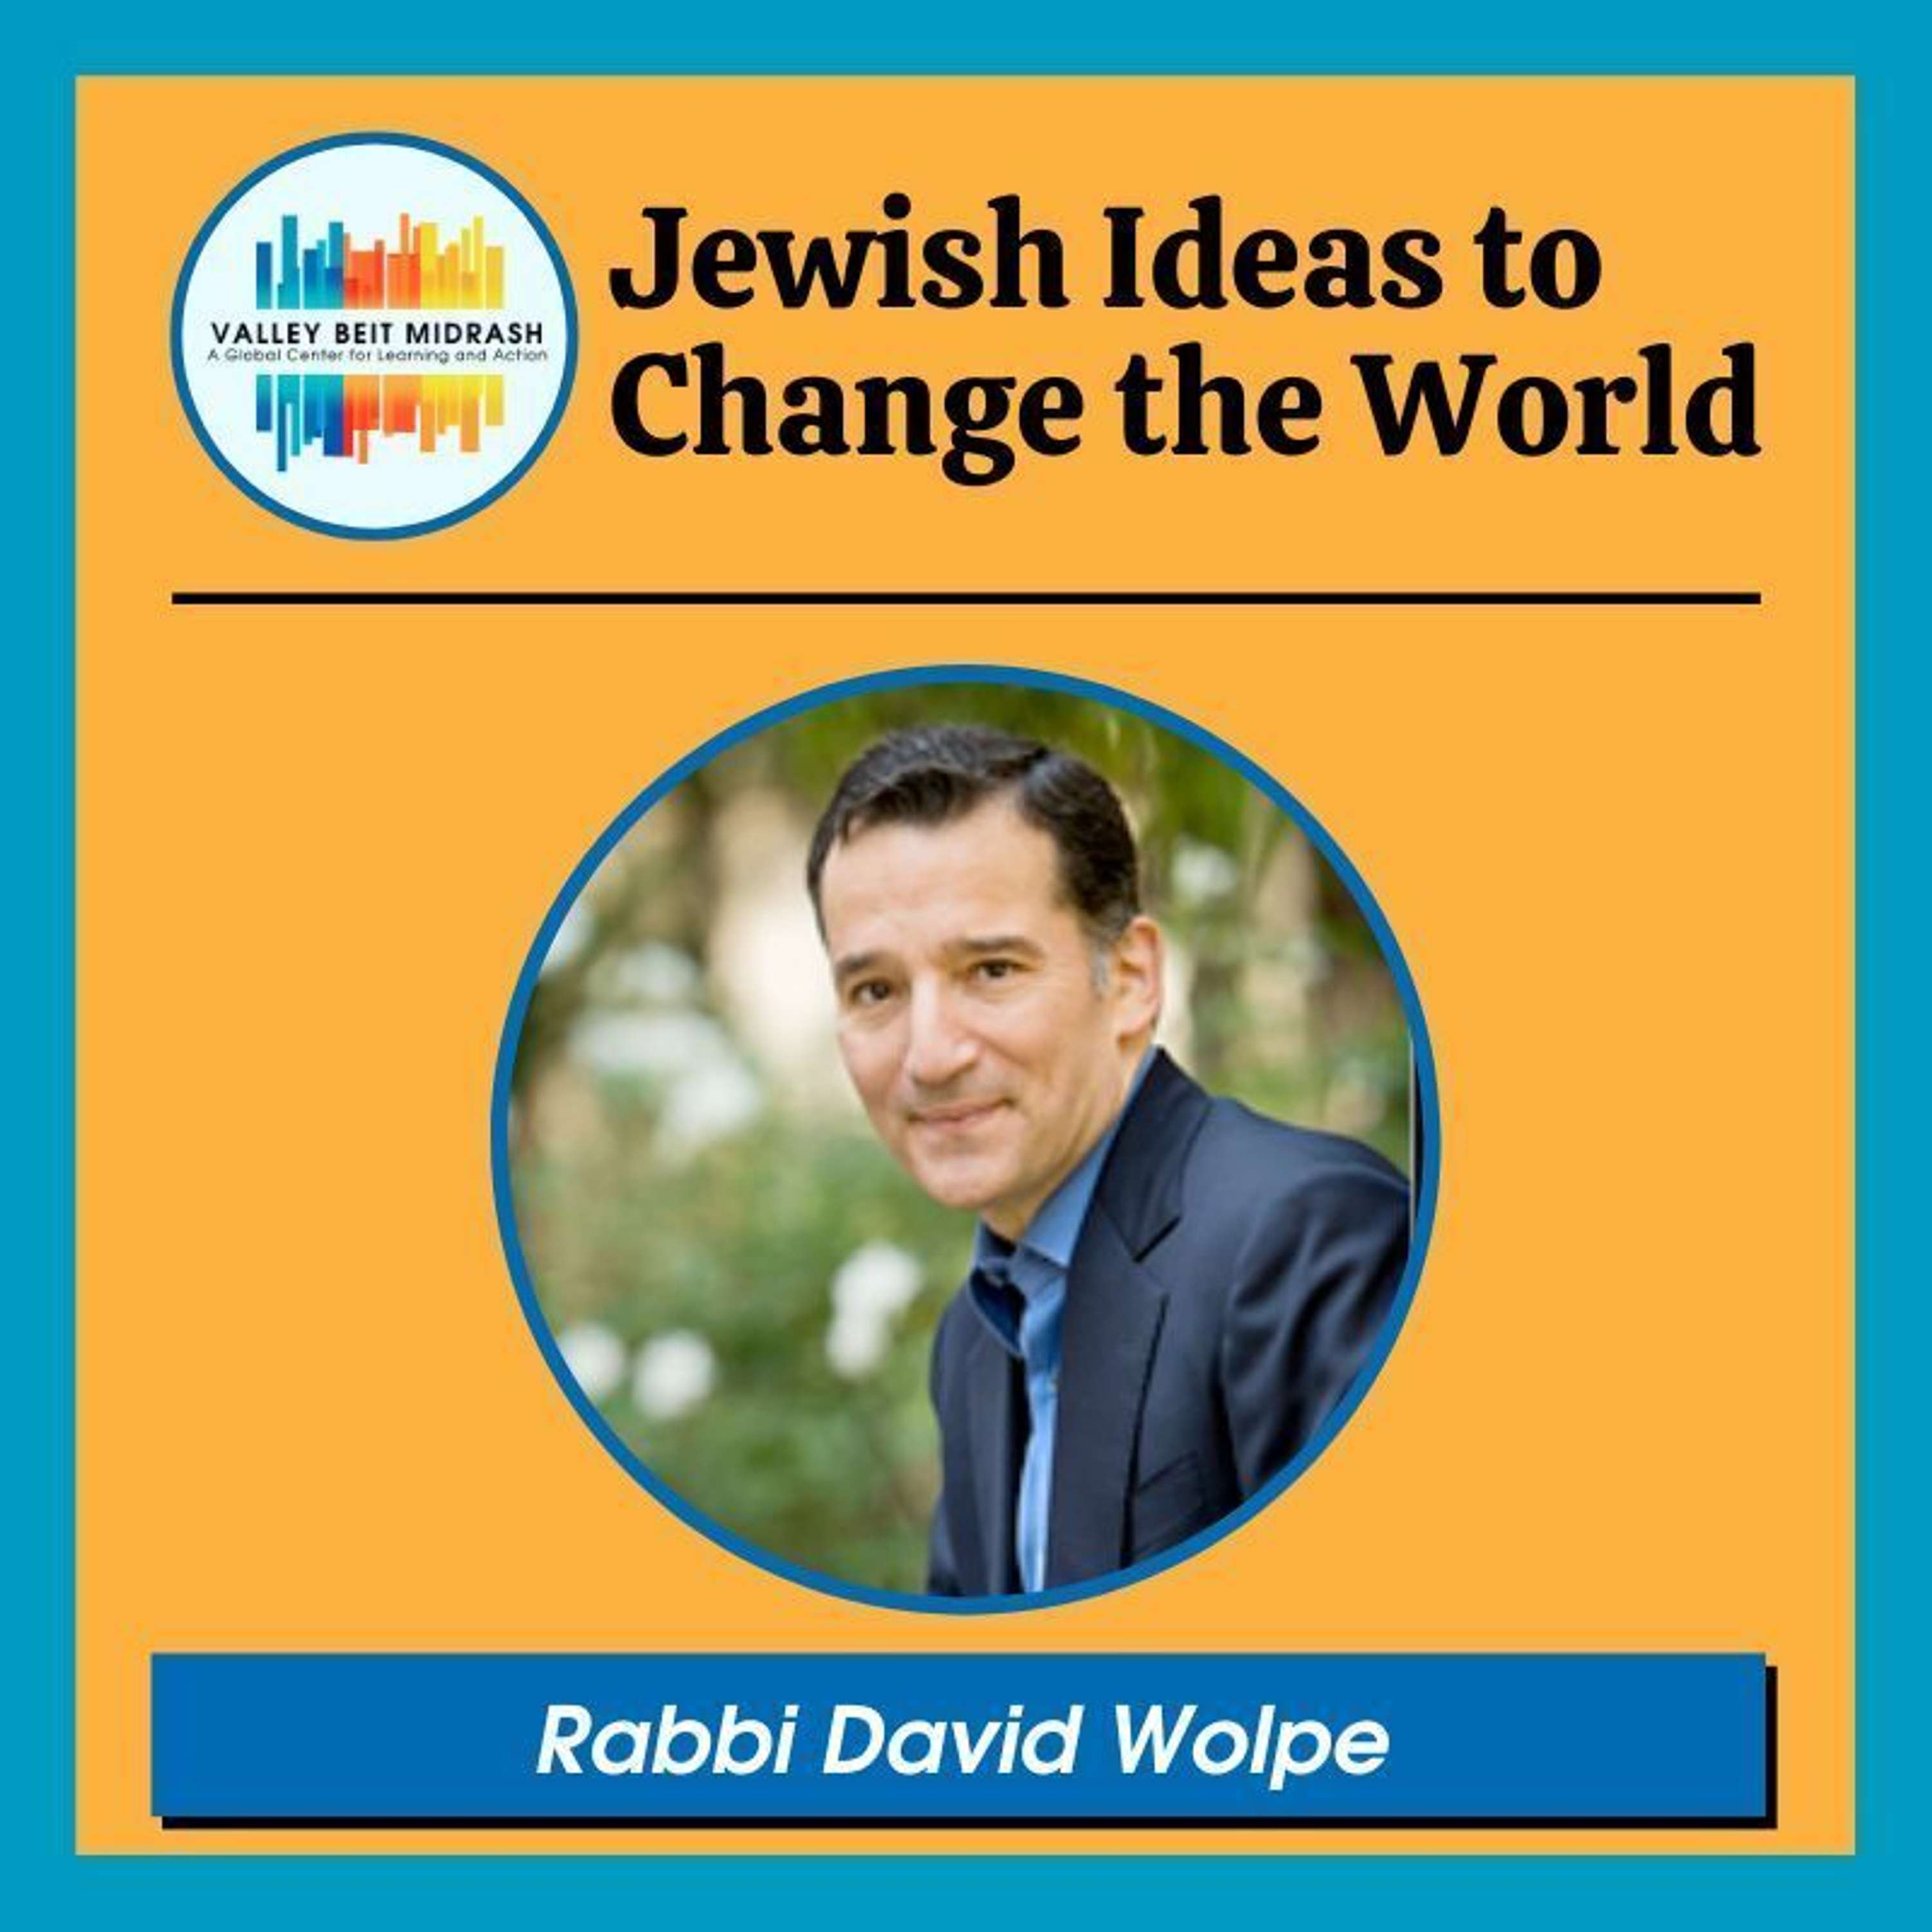 Antisemitism in America: An Interview with Rabbi David Wolpe